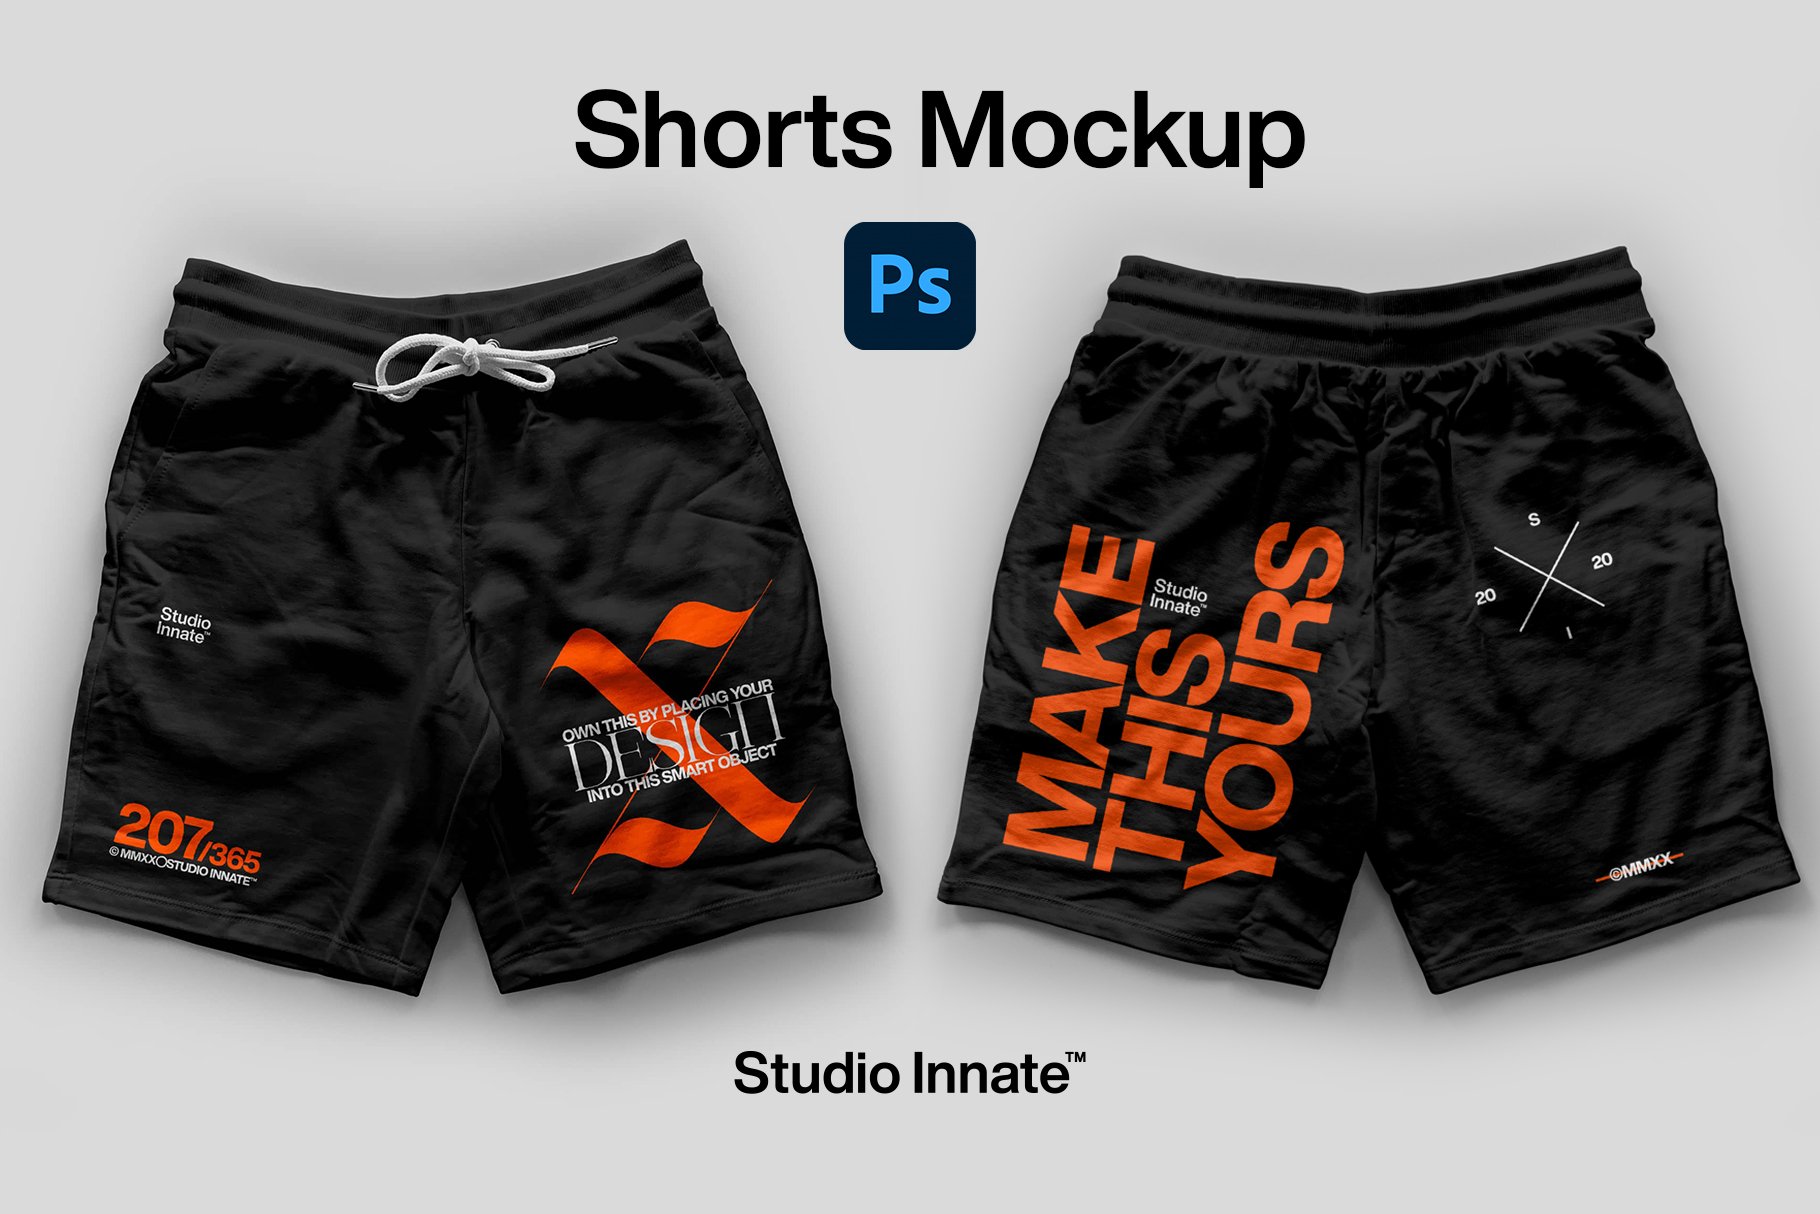 Free Boxer Shorts Mockup PSD Template by Mockup Den on Dribbble